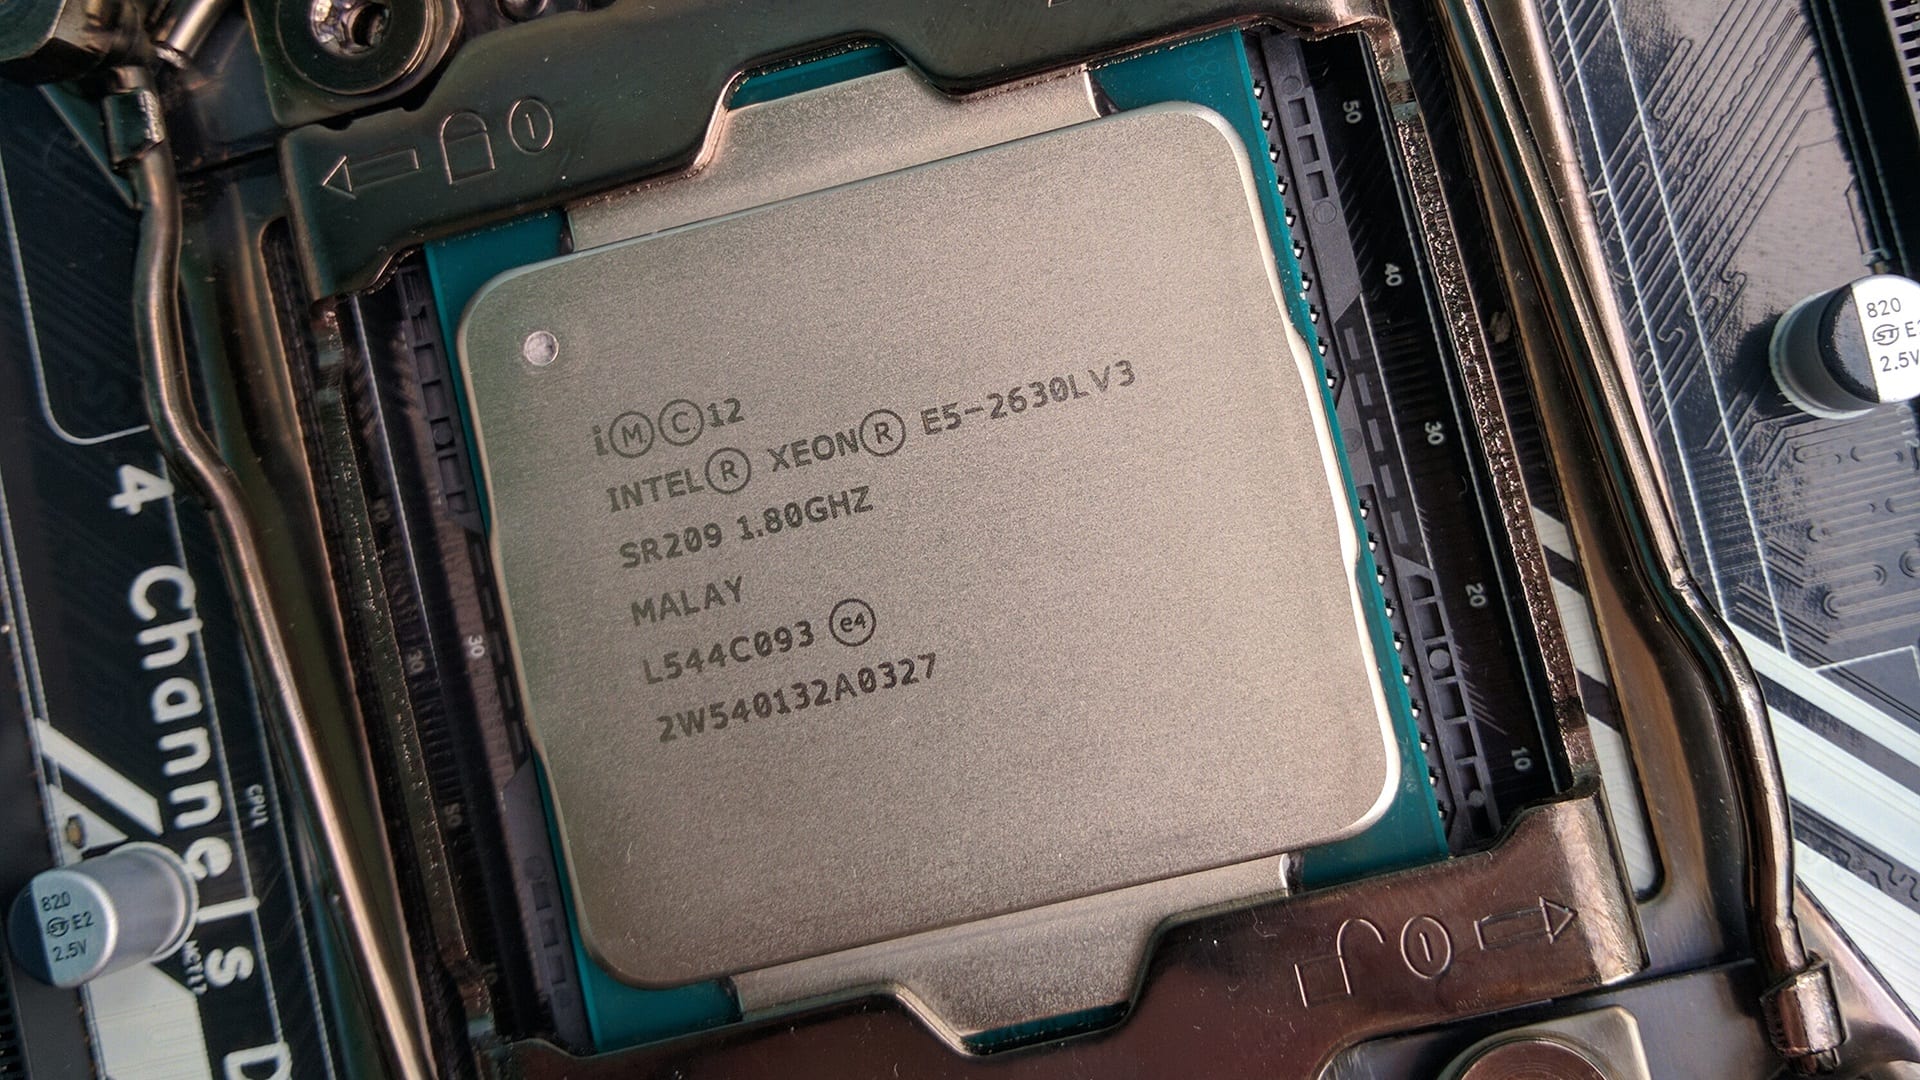 Review And Testing Of The Eight Core Intel Xeon E5 2630l V3 Processor In Popular Games Programs And Benchmarks Umtale Lab